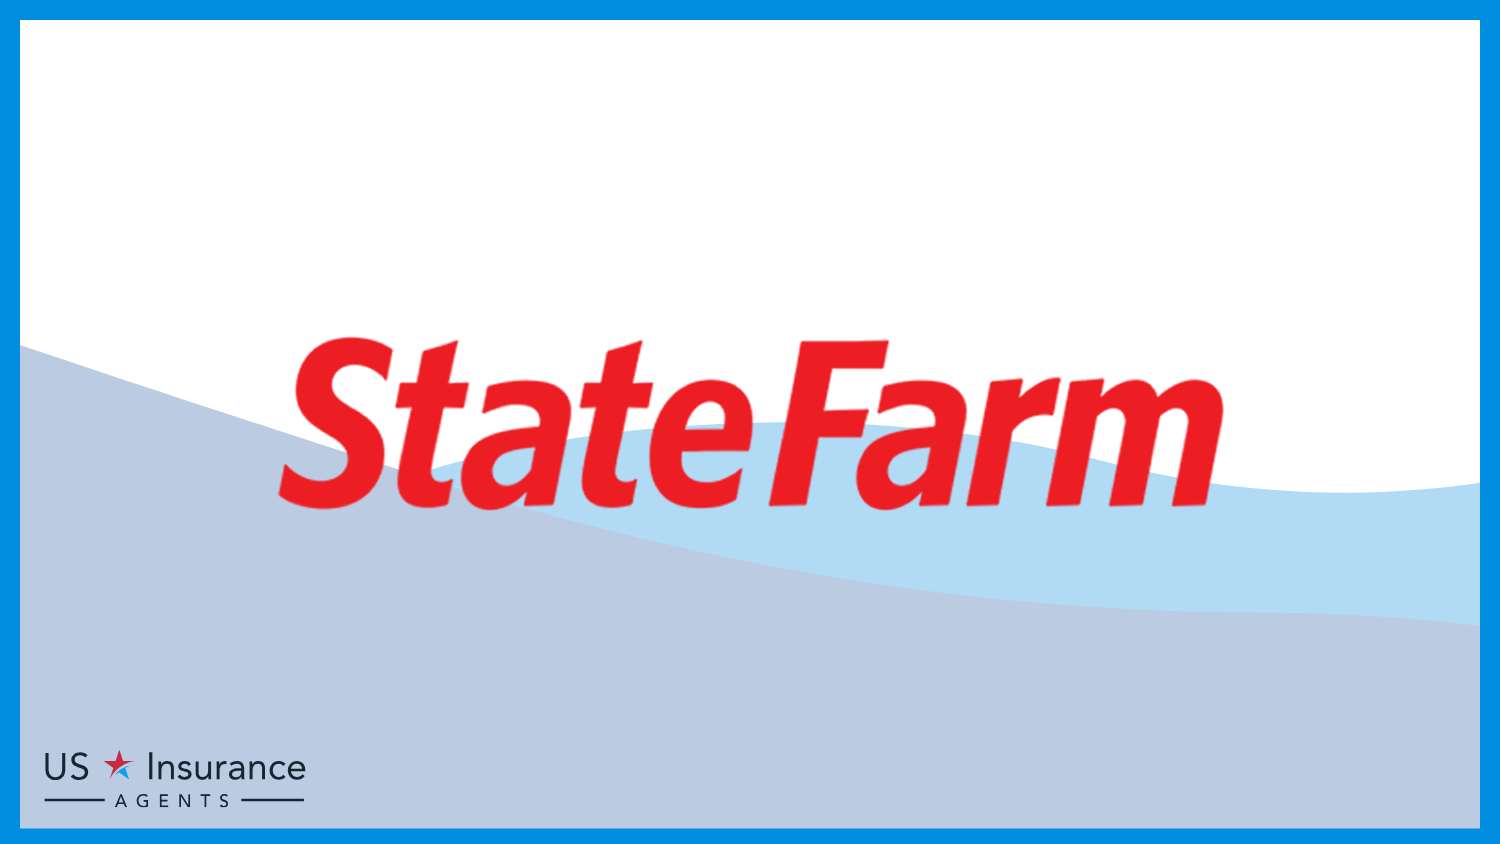 State Farm: Best Car Insurance for Young Adults